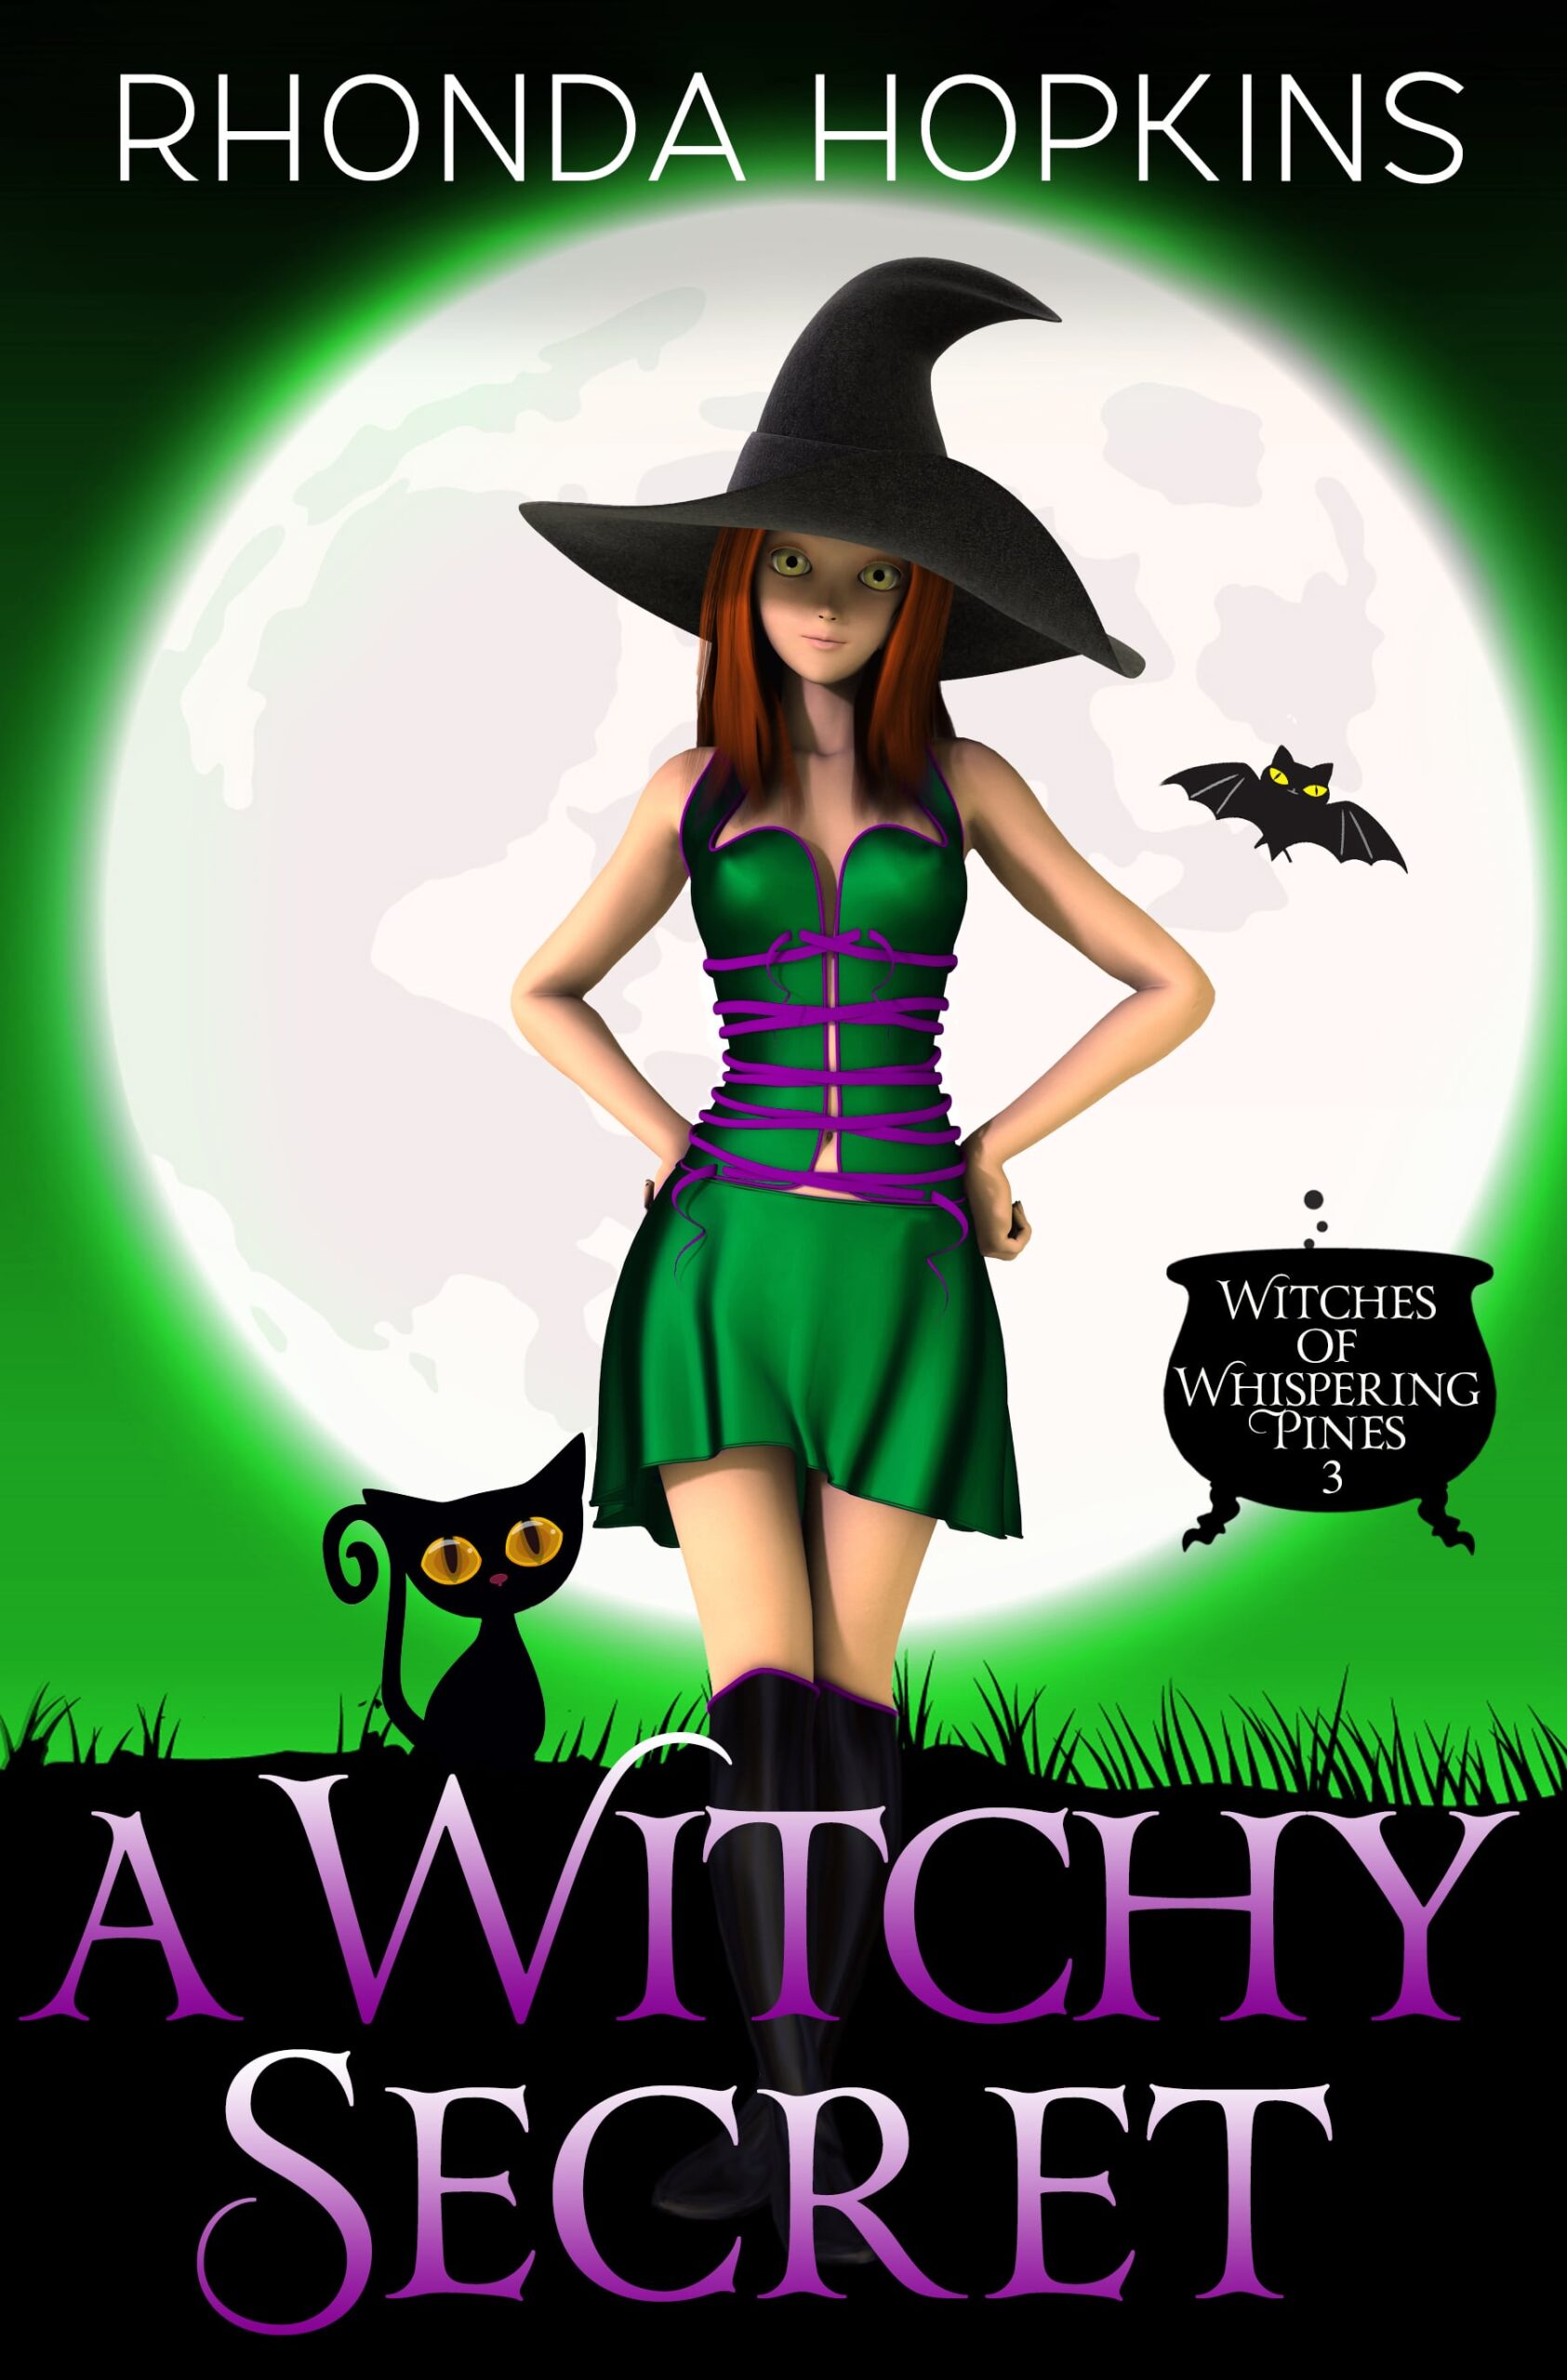 A Witchy Secret by Rhonda Hopkins. There's a teen girl in a cute green dress, black boots, and a witch's hat standing in front of a large moon on a green background. There's a cute black kitten on the left and a cauldron on the right.